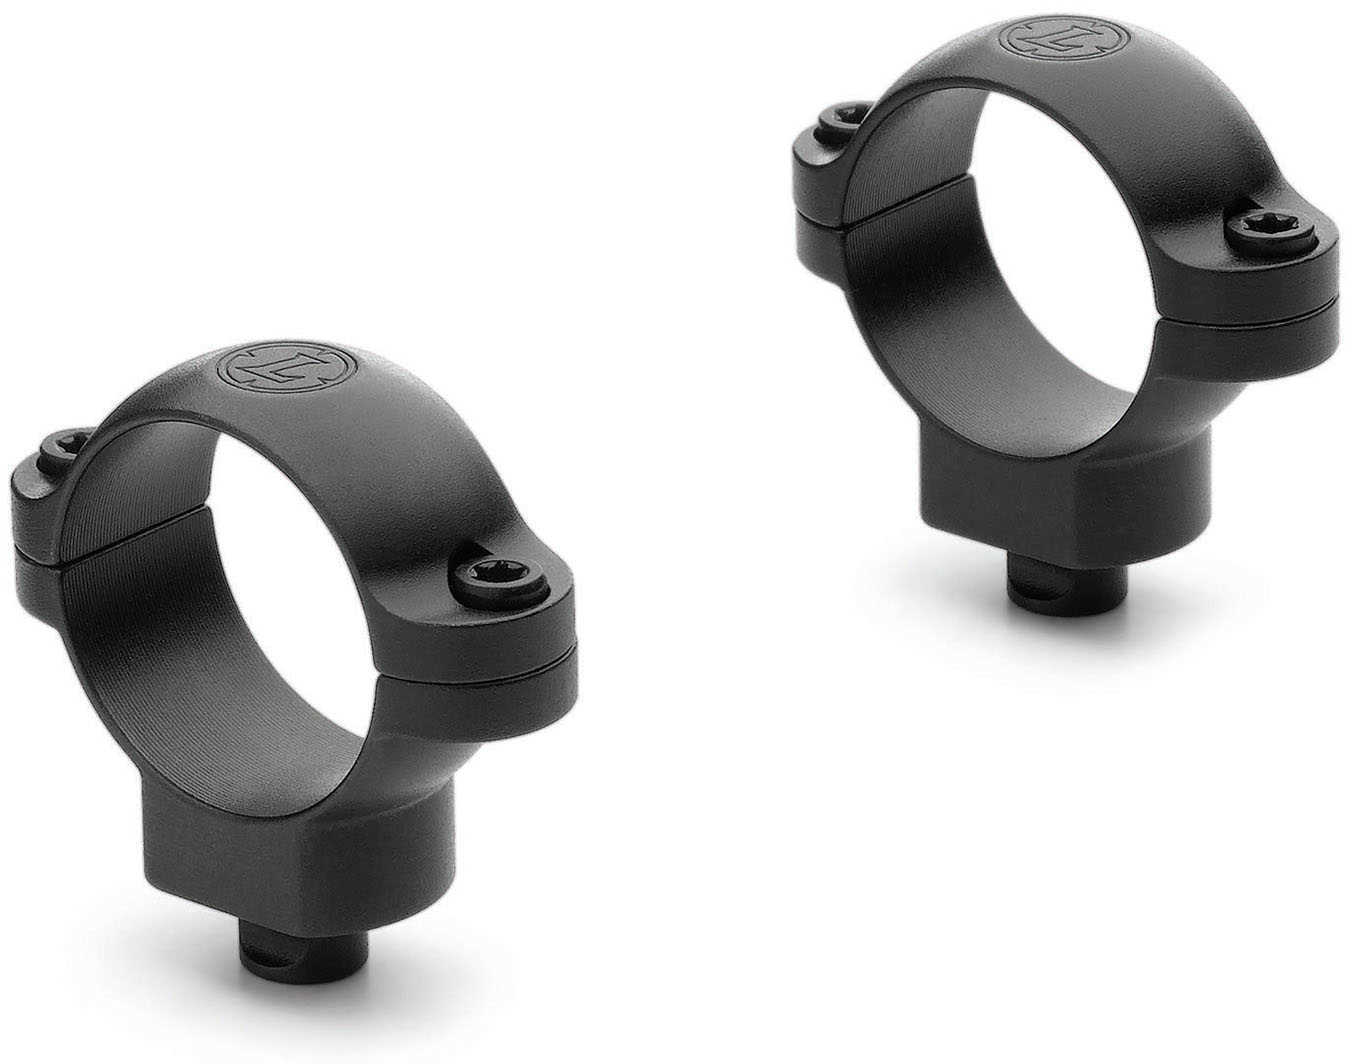 Leupold Quick Release 1" Rings Medium, Matte Finish Remove & Reattach Your Scope And return To Within 1/2" Of The Origin